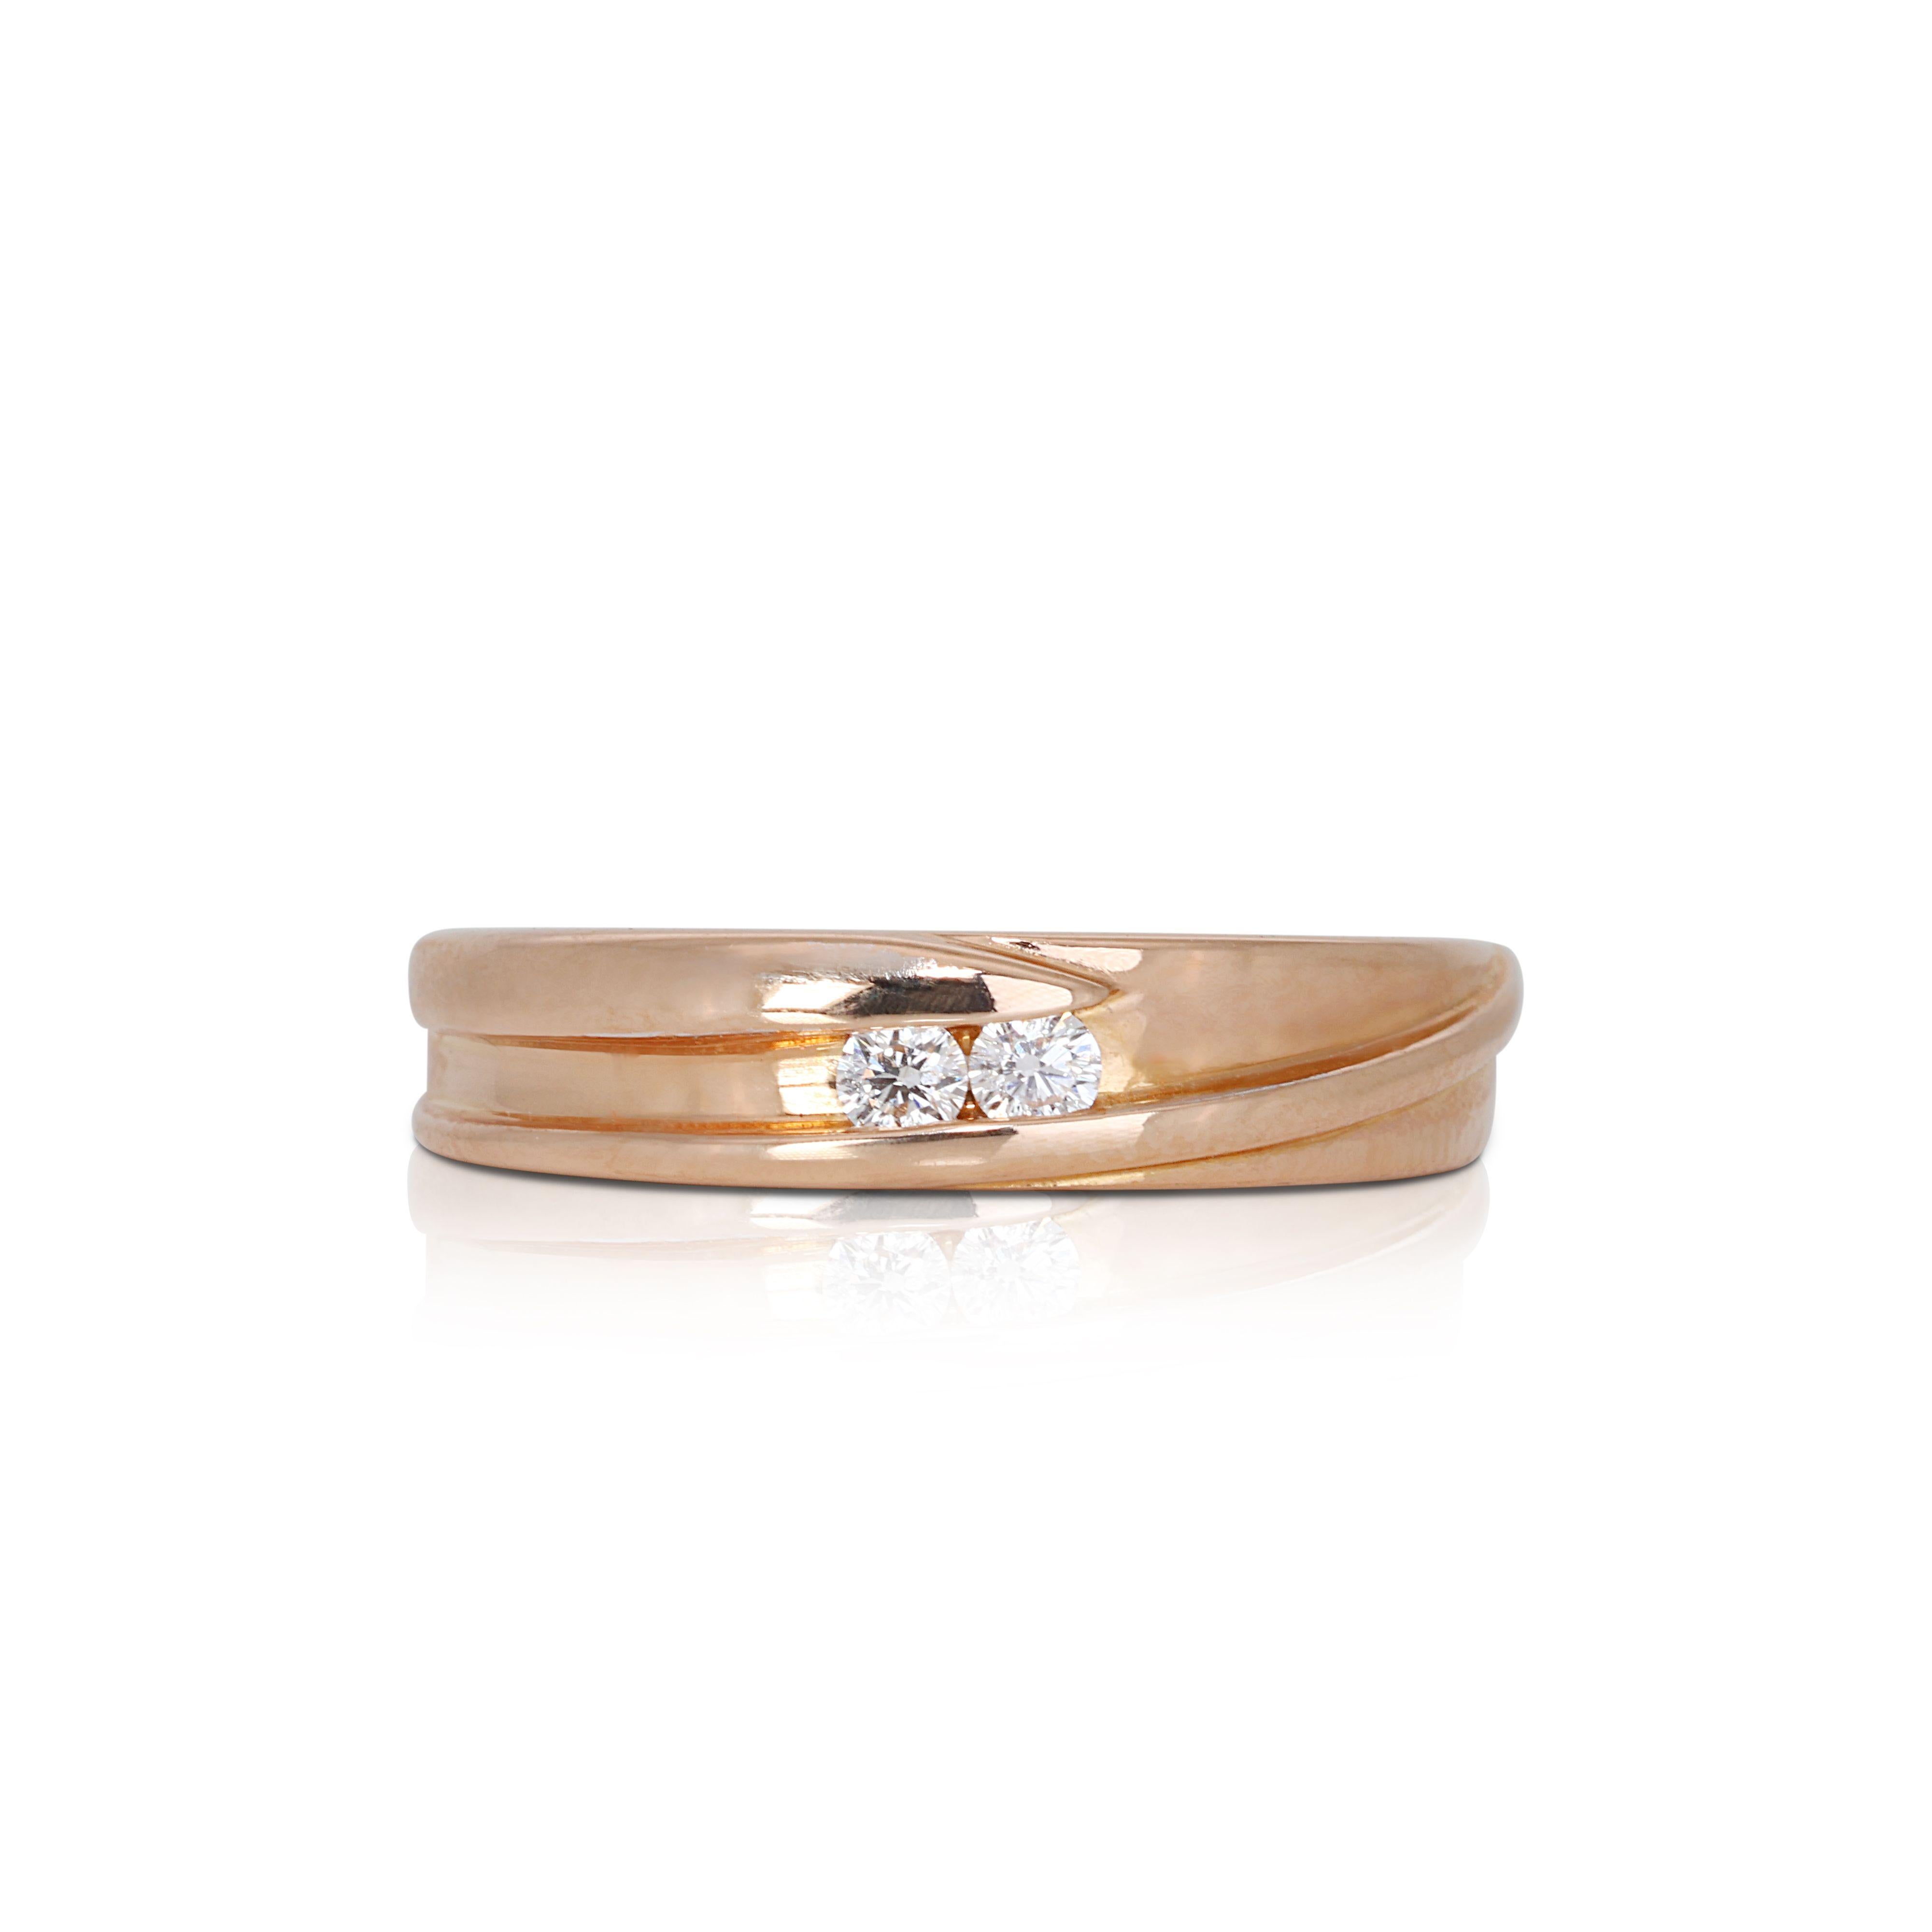 Framing the diamonds is a band of lustrous 18k yellow gold, providing a lovely two-tone effect. The yellow gold extends halfway around the shank, meeting the white gold in a seamless design. This ring makes a timeless and romantic gift for an